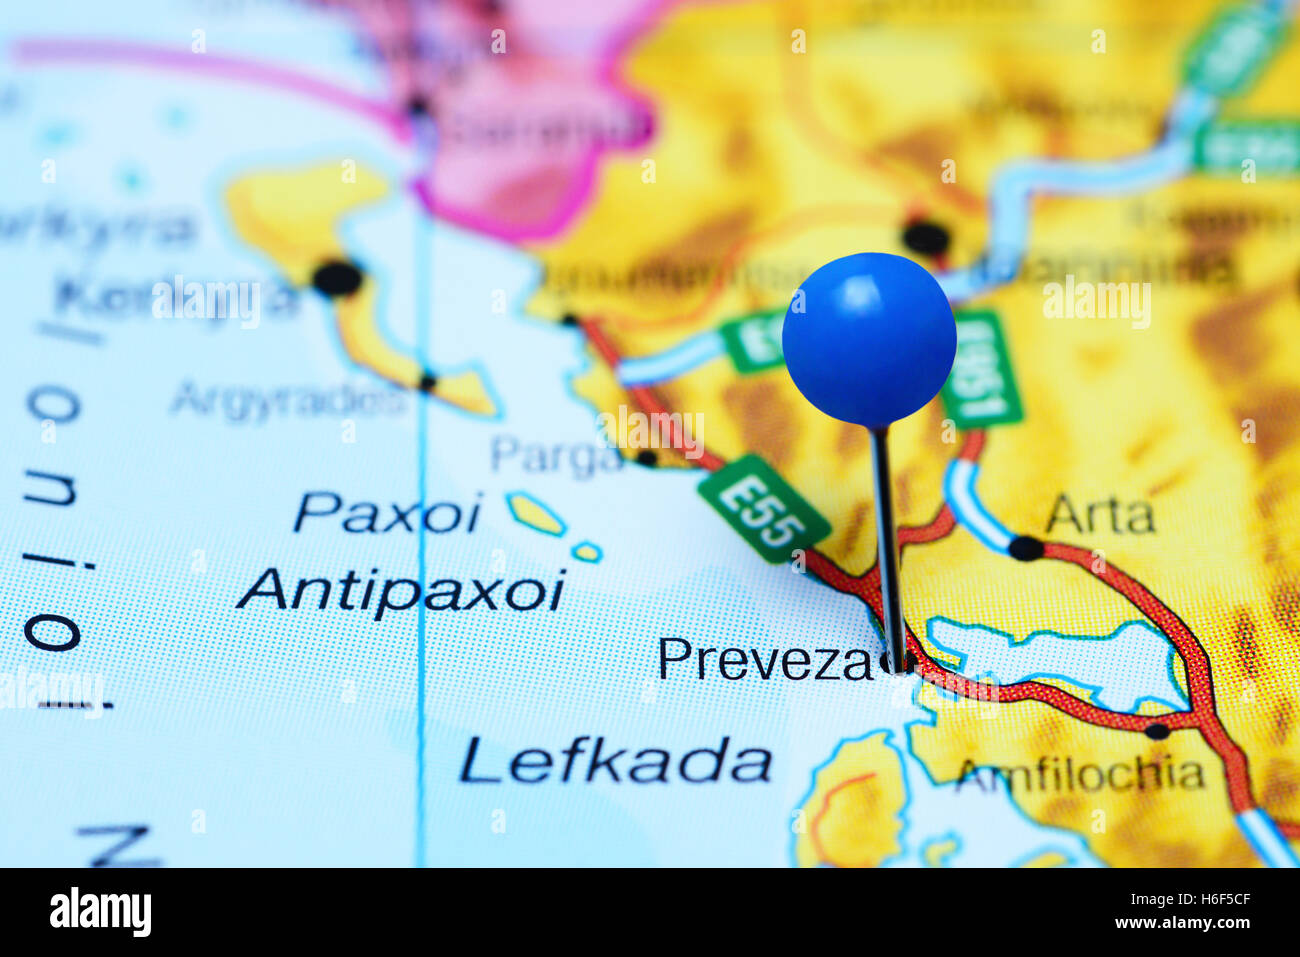 Preveza pinned on a map of Greece Stock Photo